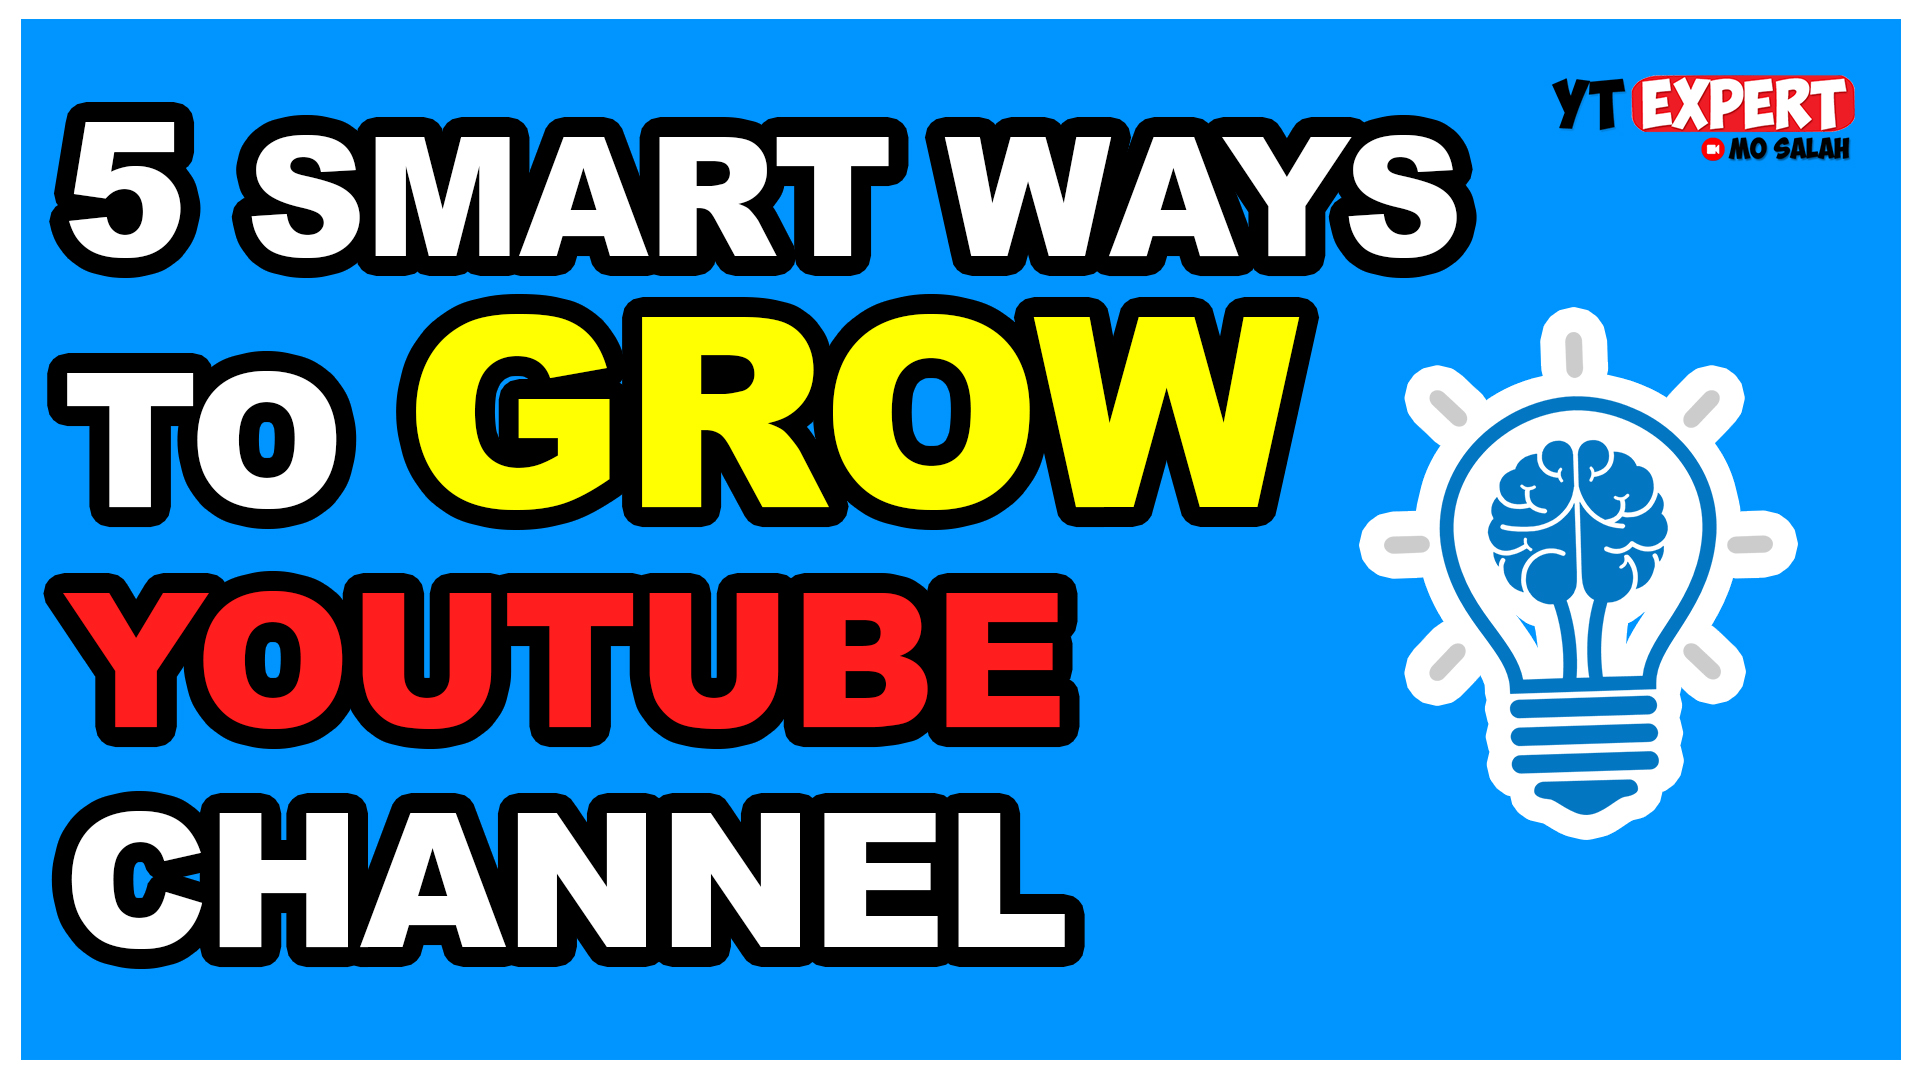 How To Grow YouTube Channel The SMART Way